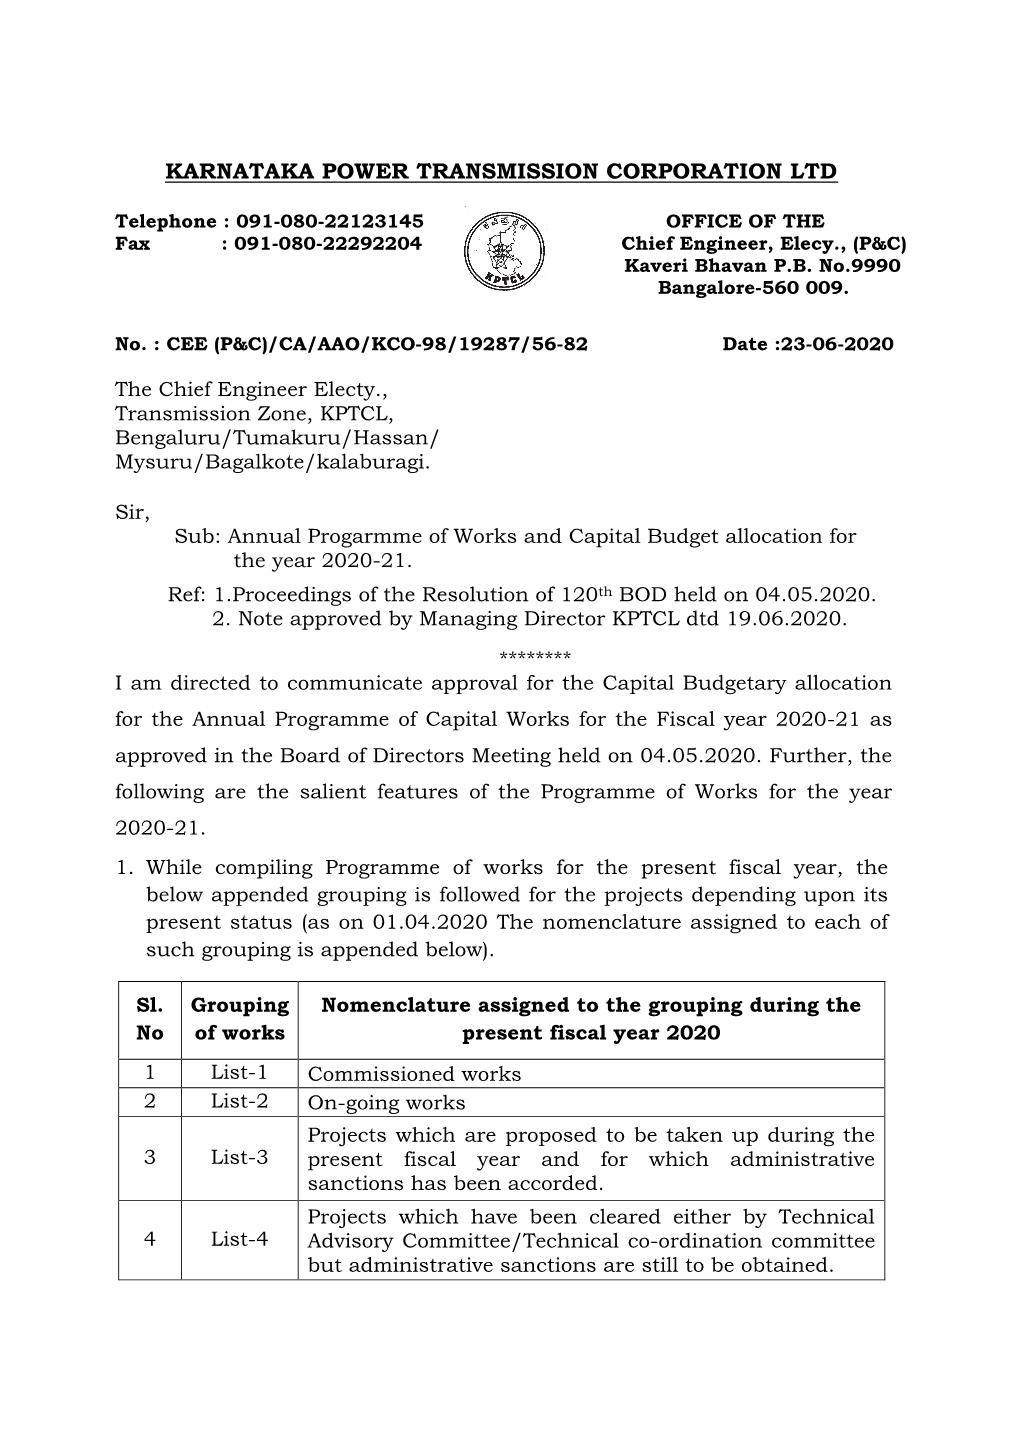 Annual Programme of Works and Capital Budget Allocation for The